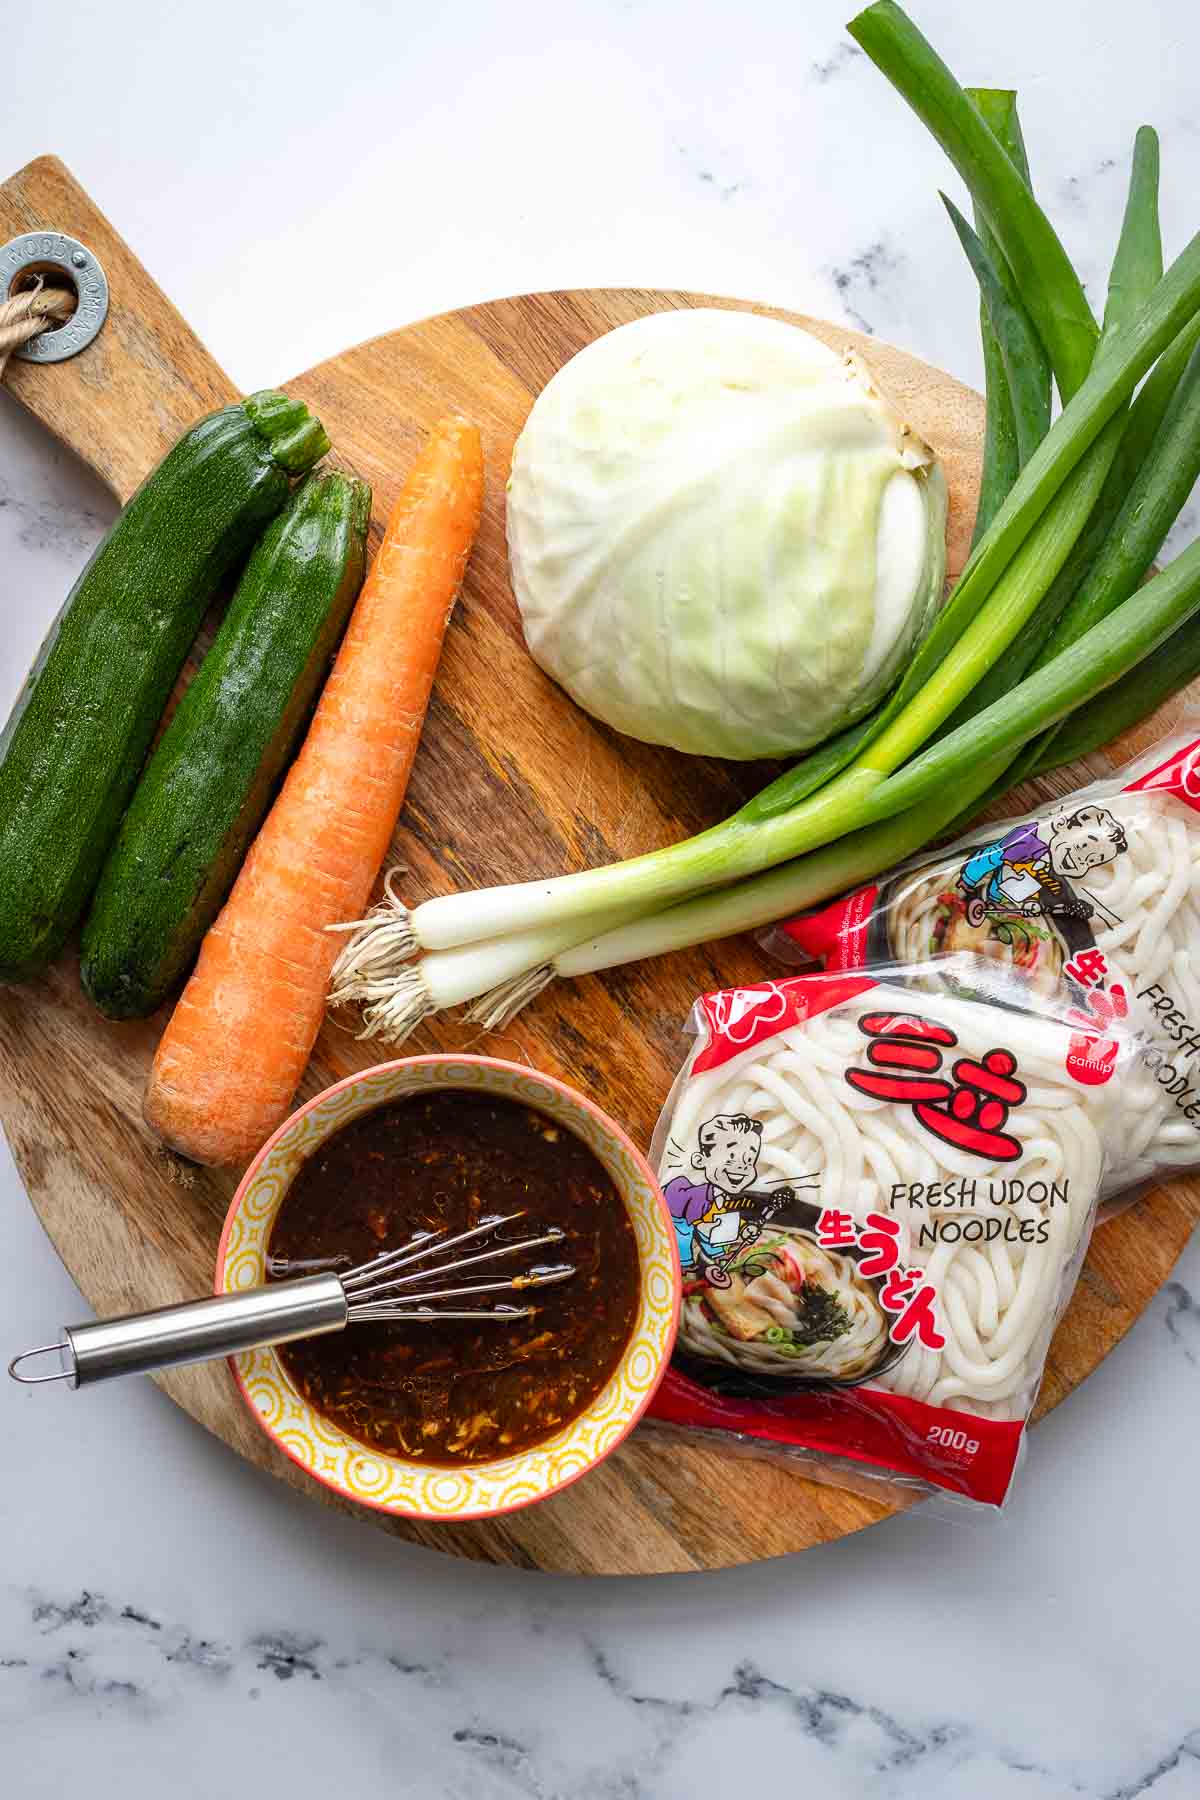 Ingredients for Stir-Fry with Udon Noodles